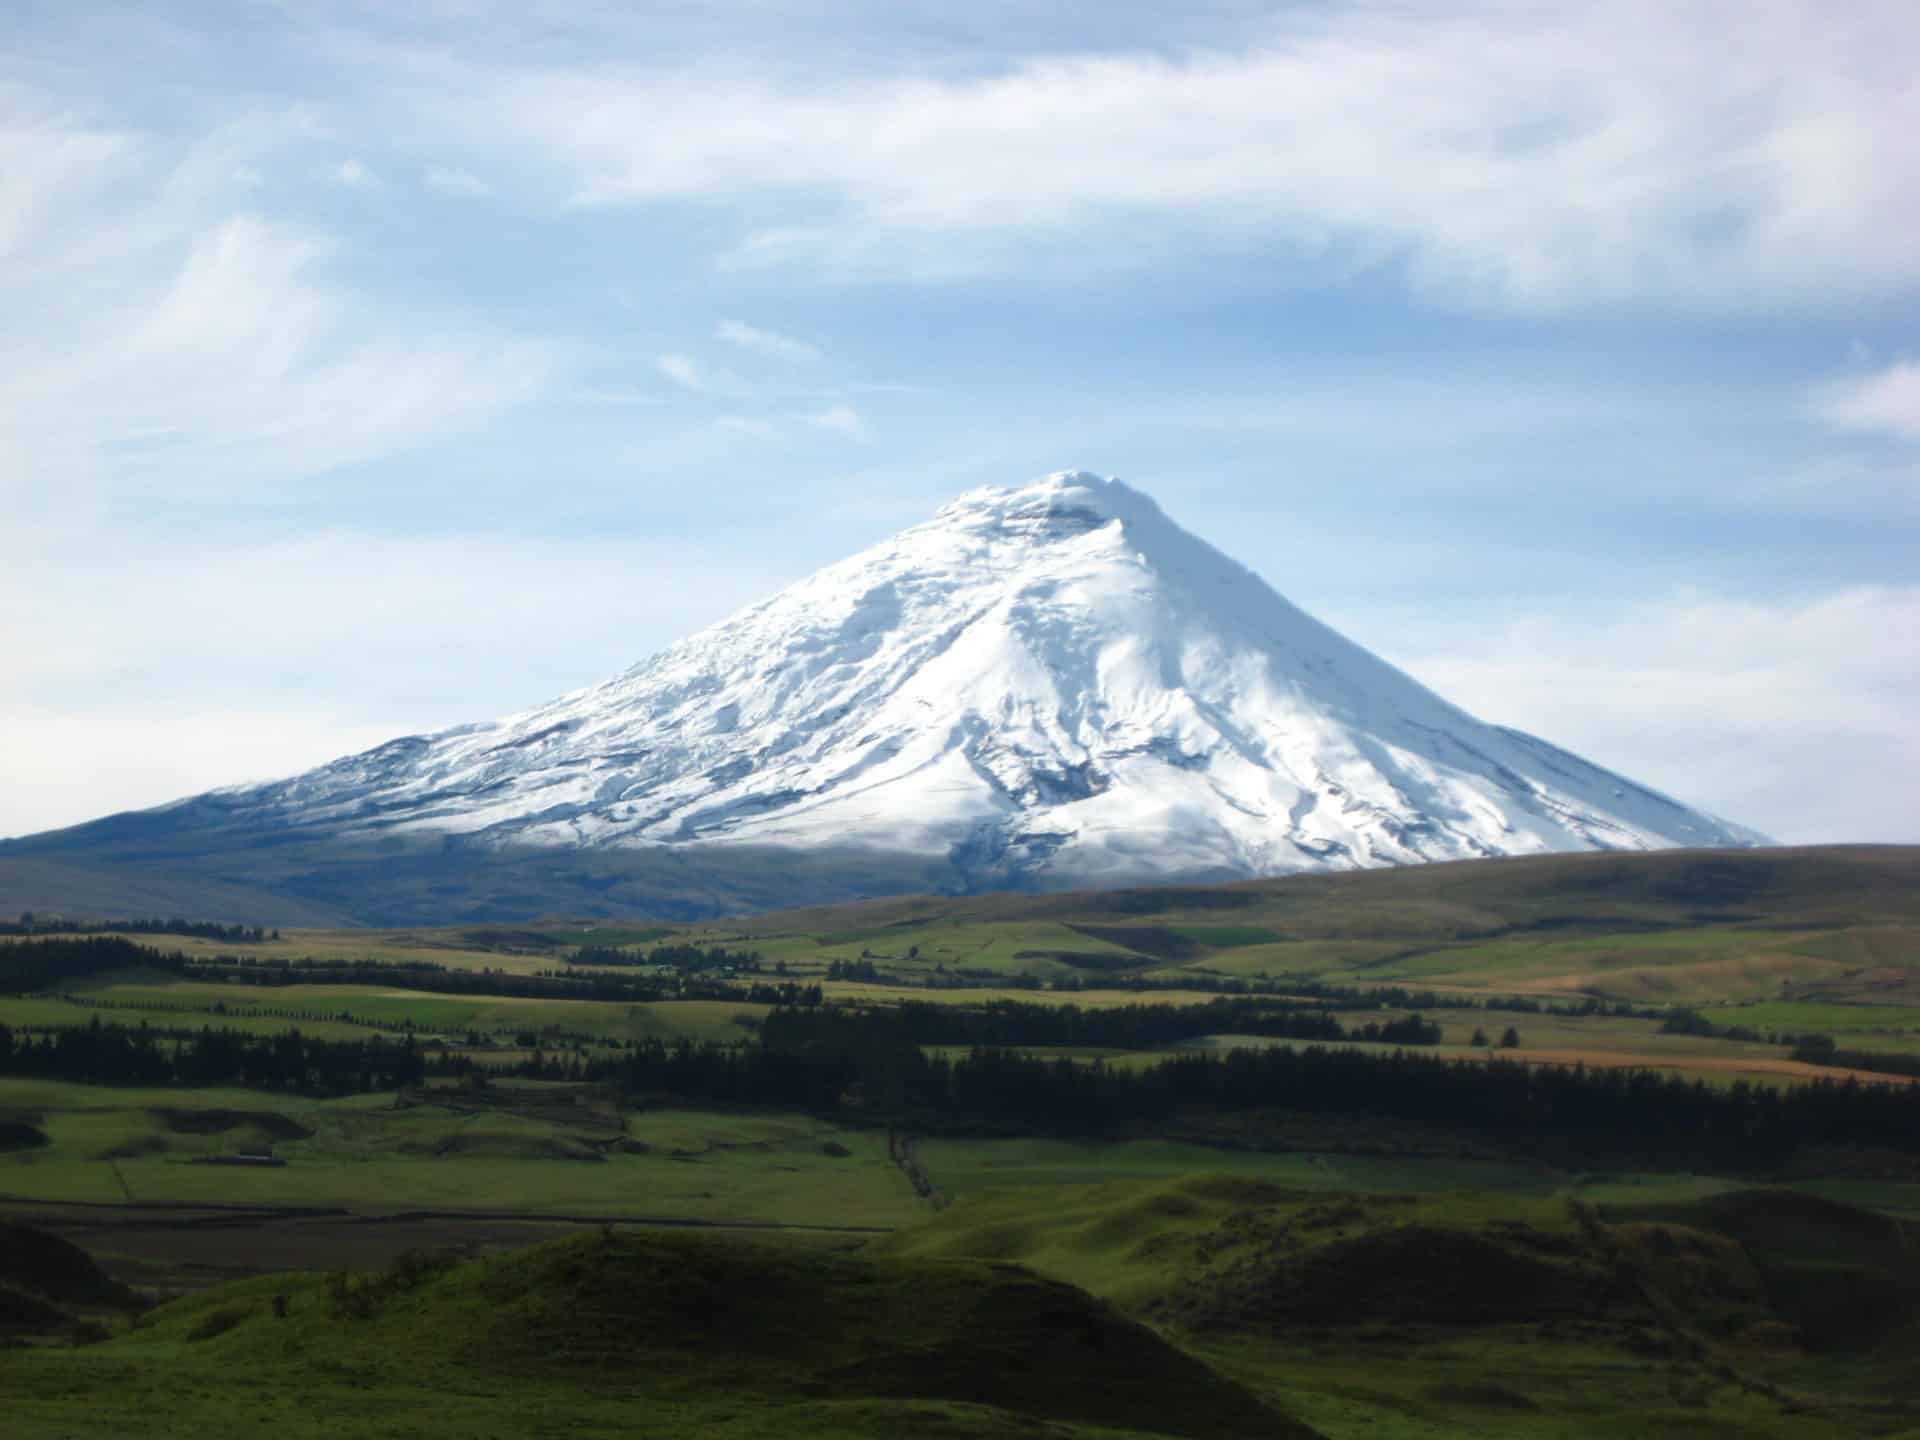 Hike Quilotoa Lagoon and Cotopaxi National Park. 5-day trip. ASEGUIM leader